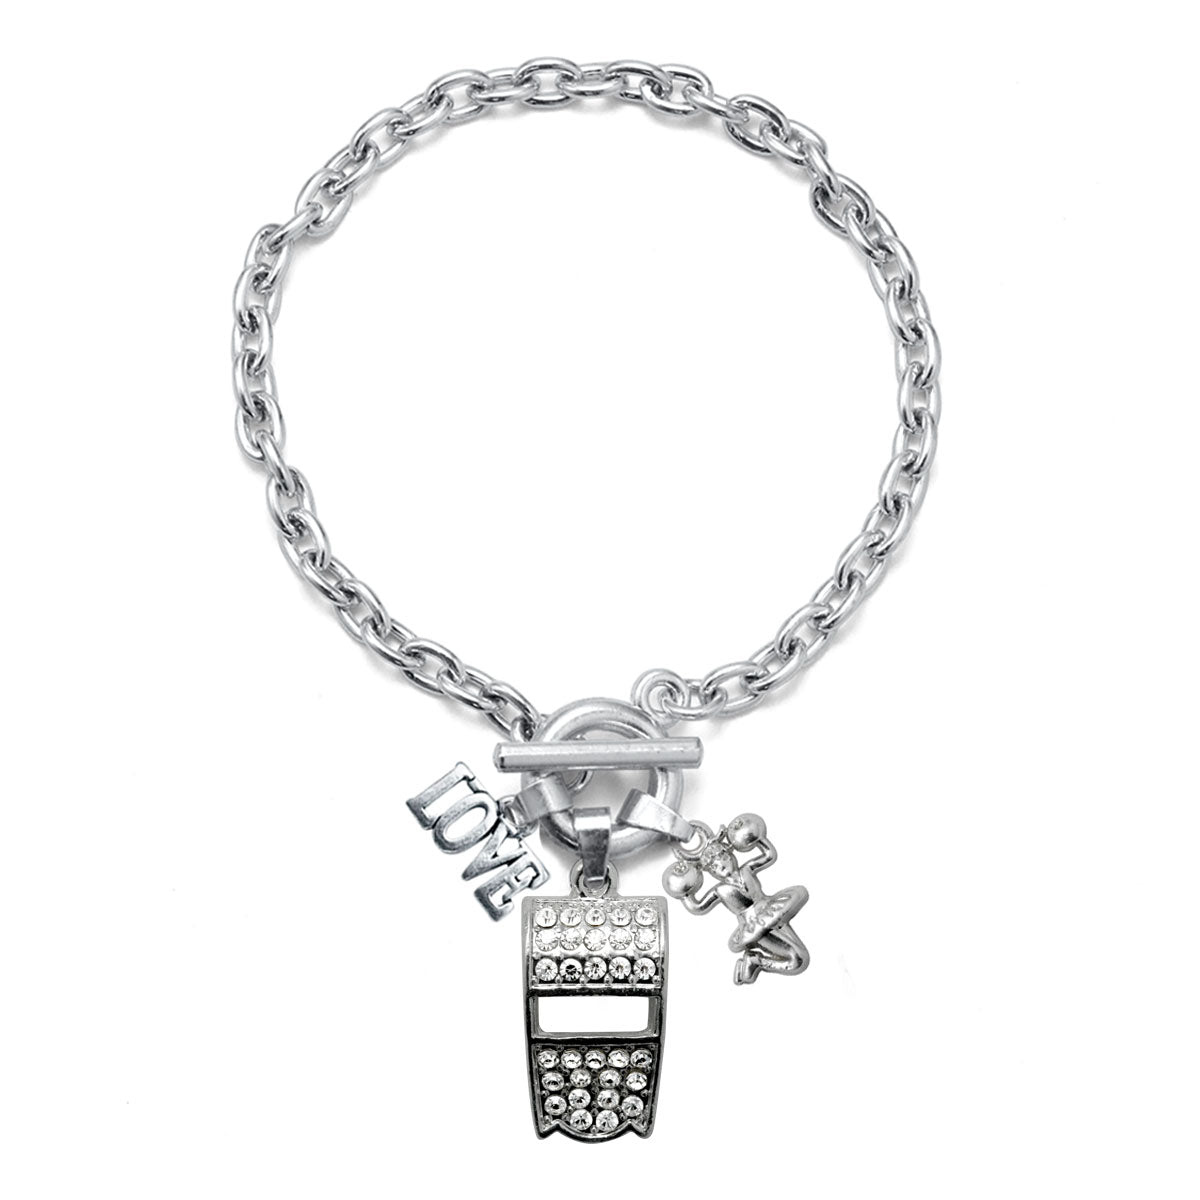 Silver Love Whistle Charm Toggle Bracelet